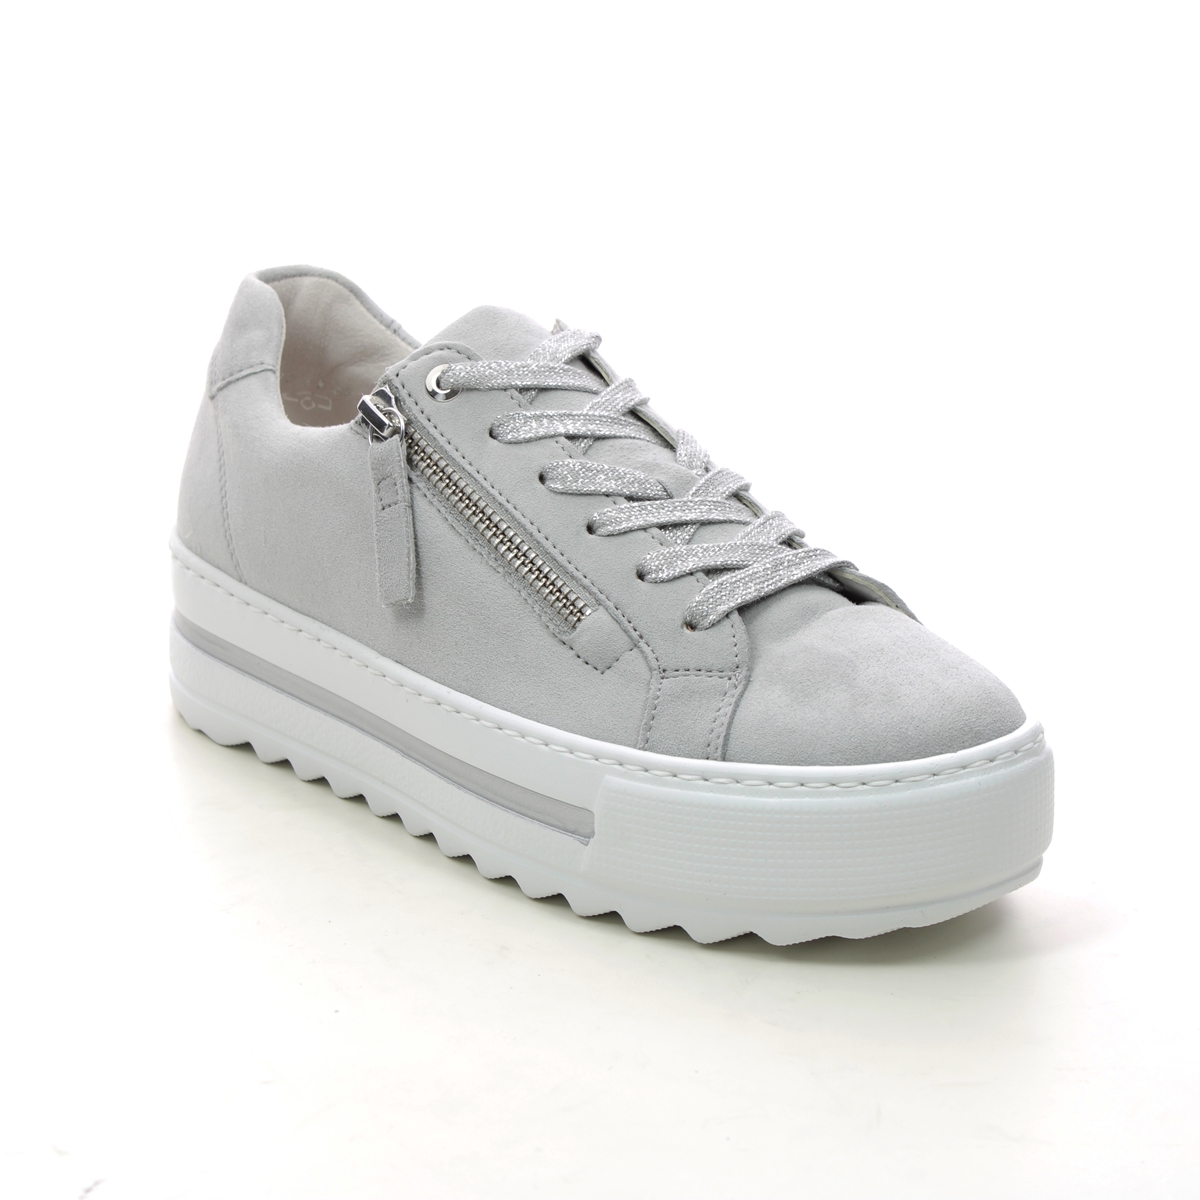 Gabor Heather Light Grey Suede Womens Trainers 26.498.40 In Size 7 In Plain Light Grey Suede  Womens Trainers In Soft Light Grey Suede Leather